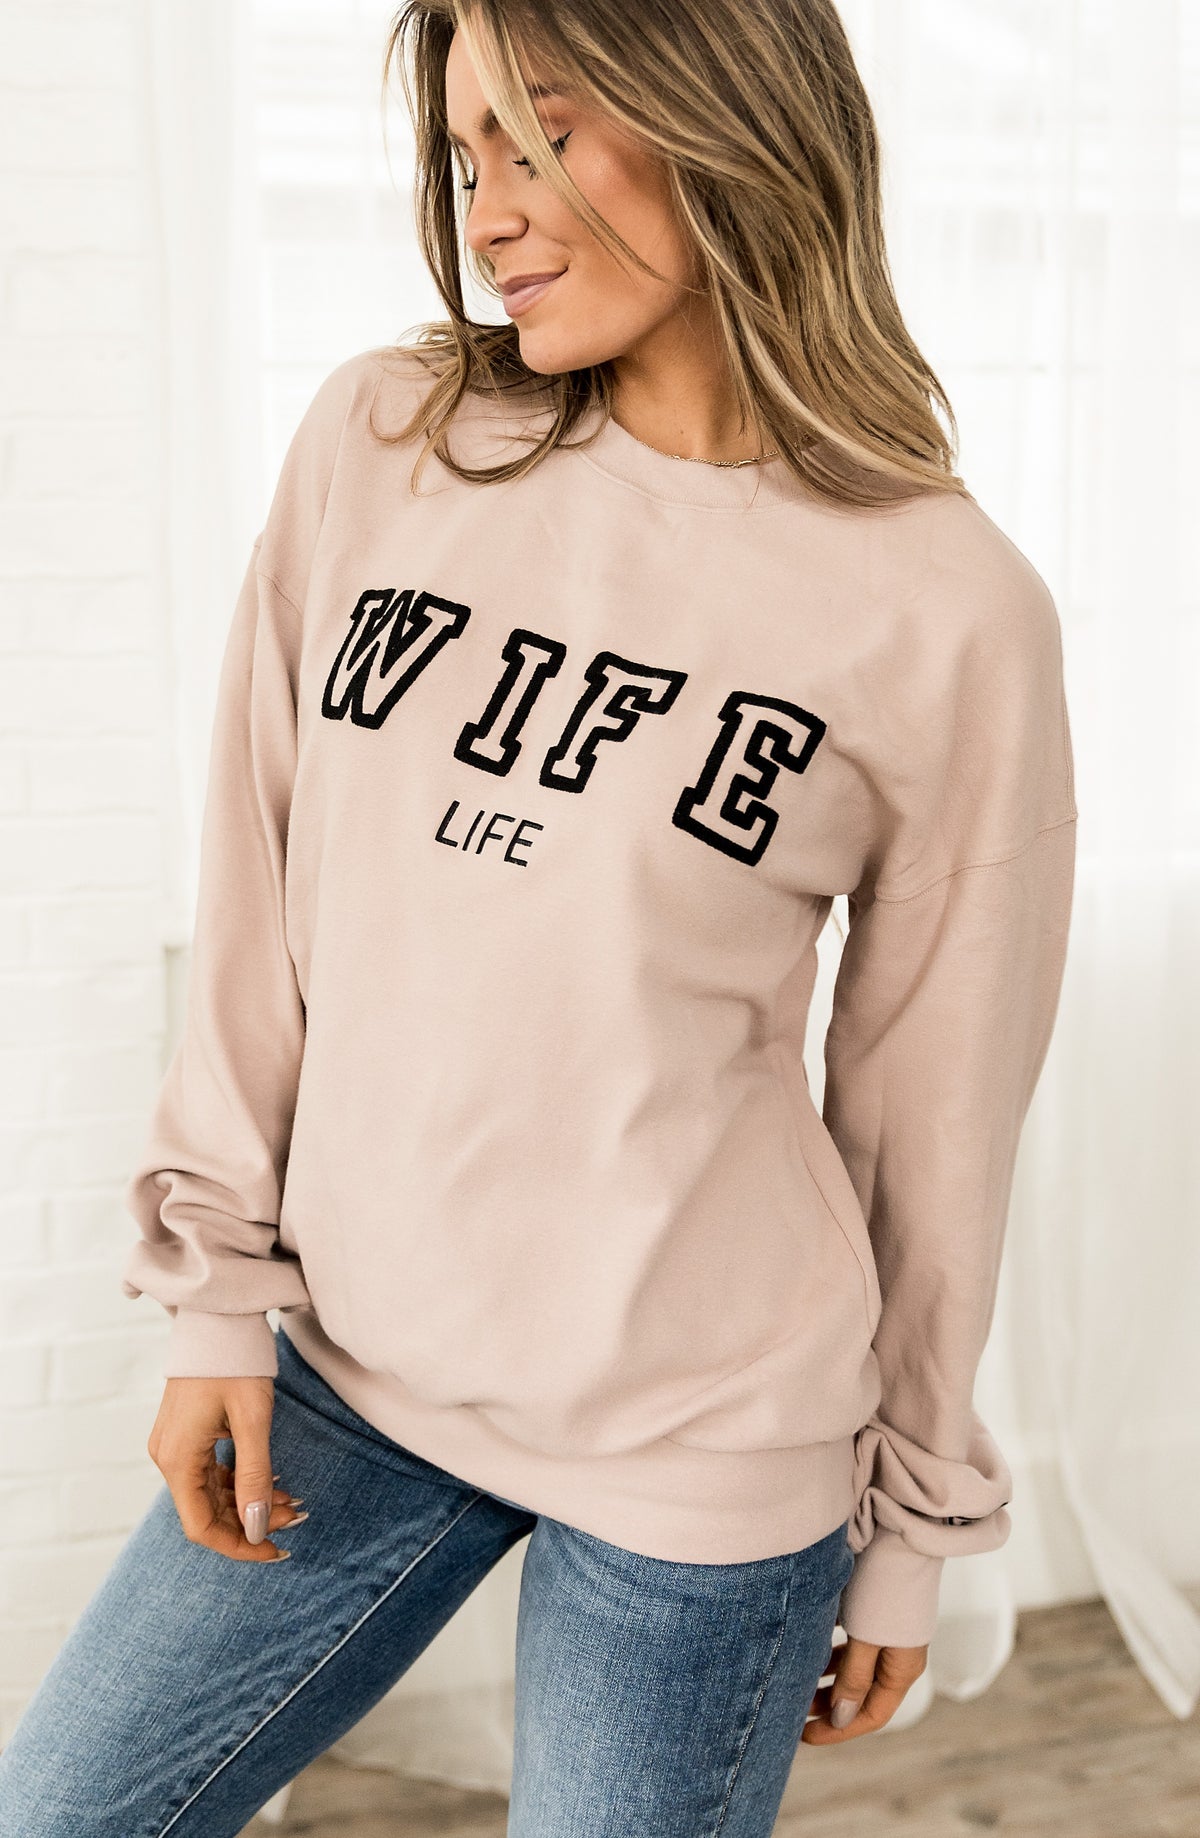 Ampersand Avenue University Pullover - Wife Life